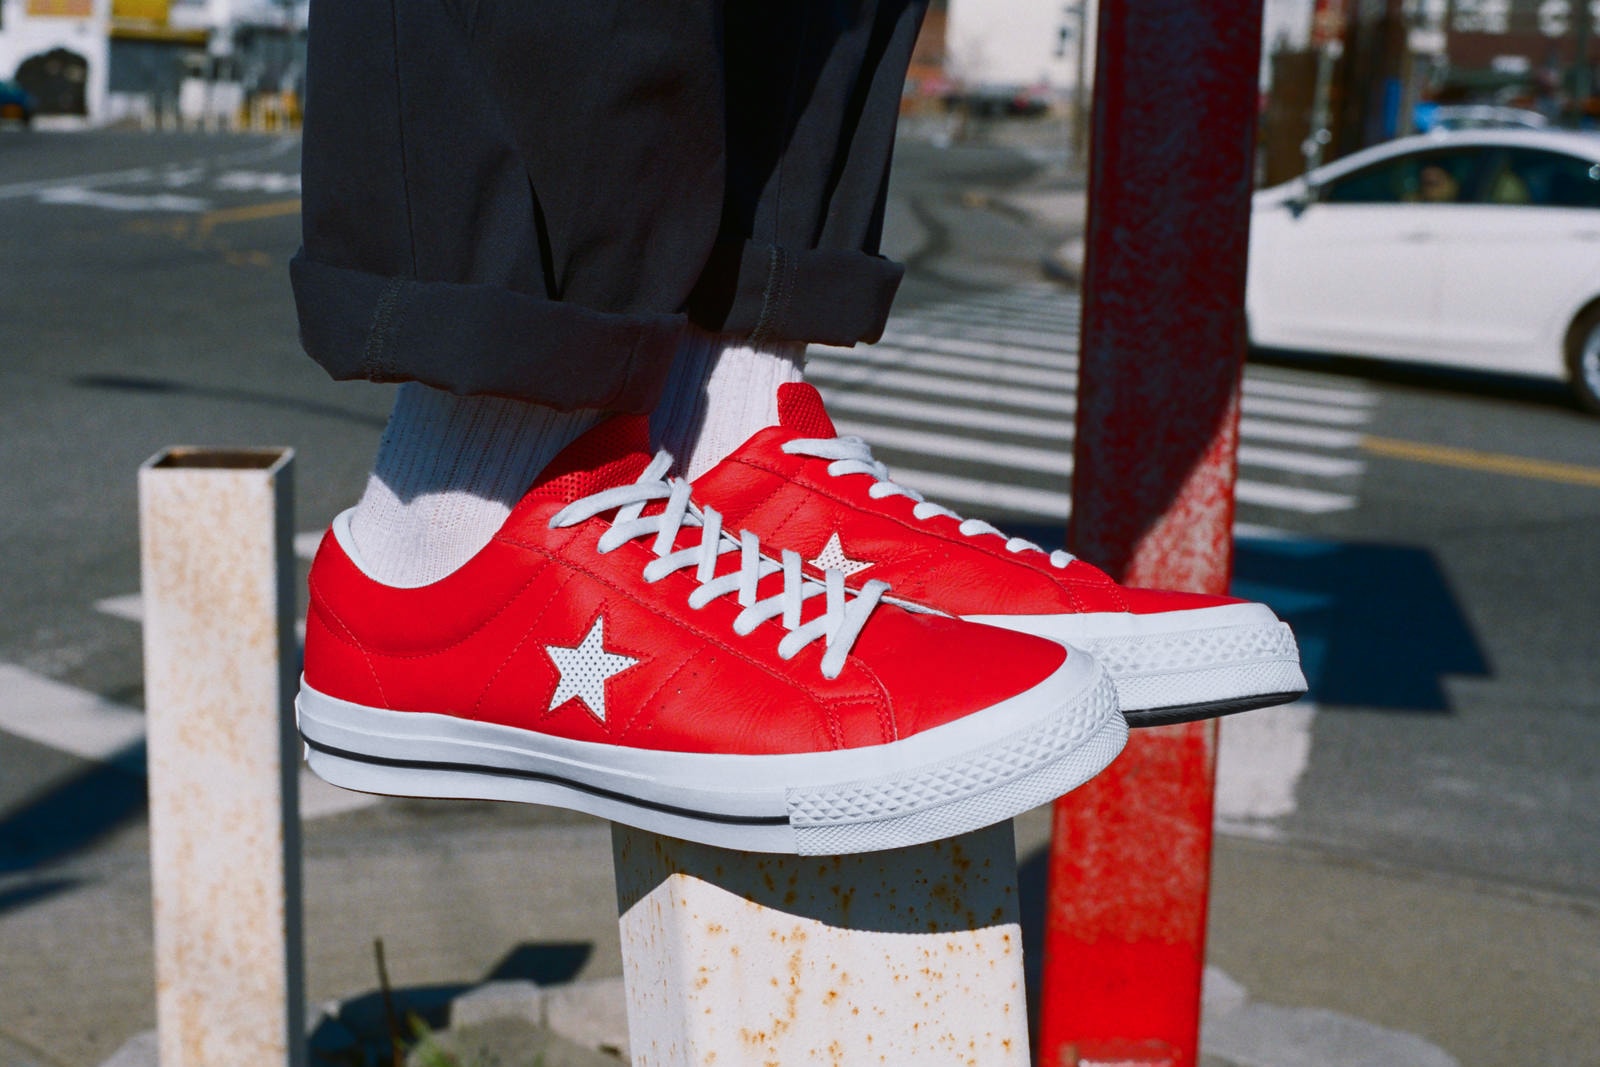 Converse One Star 全新 Perforated Leather 系列